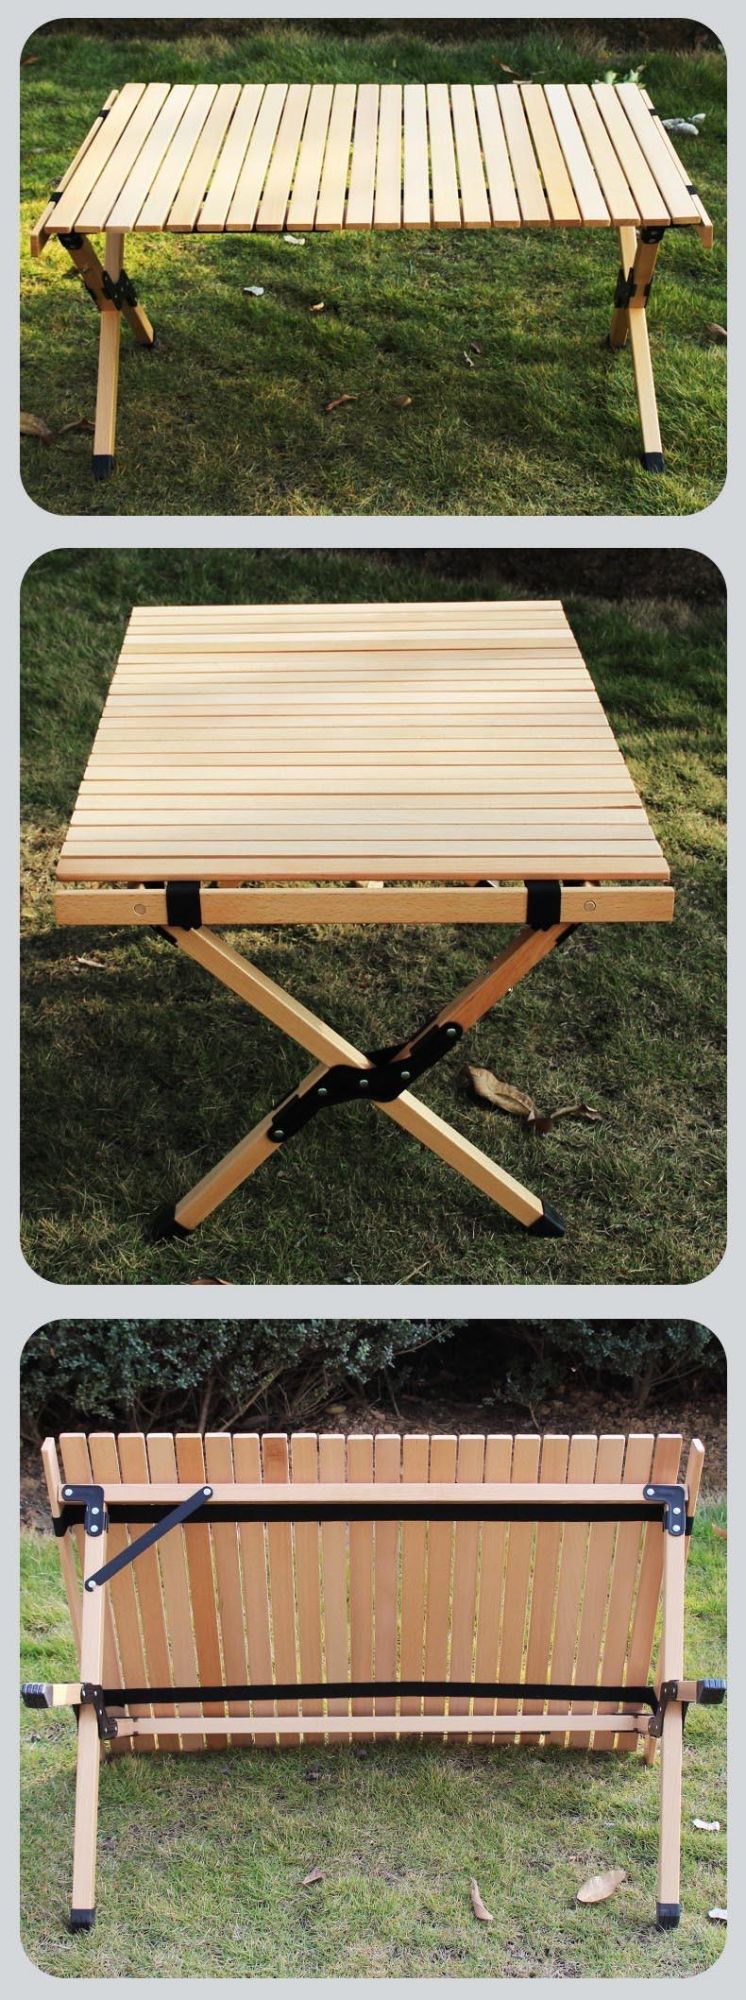 Portable Outdoor Egg Roll Table Travel Barbecue Wine Wooden BBQ Camping Picnic Folding Wood Table